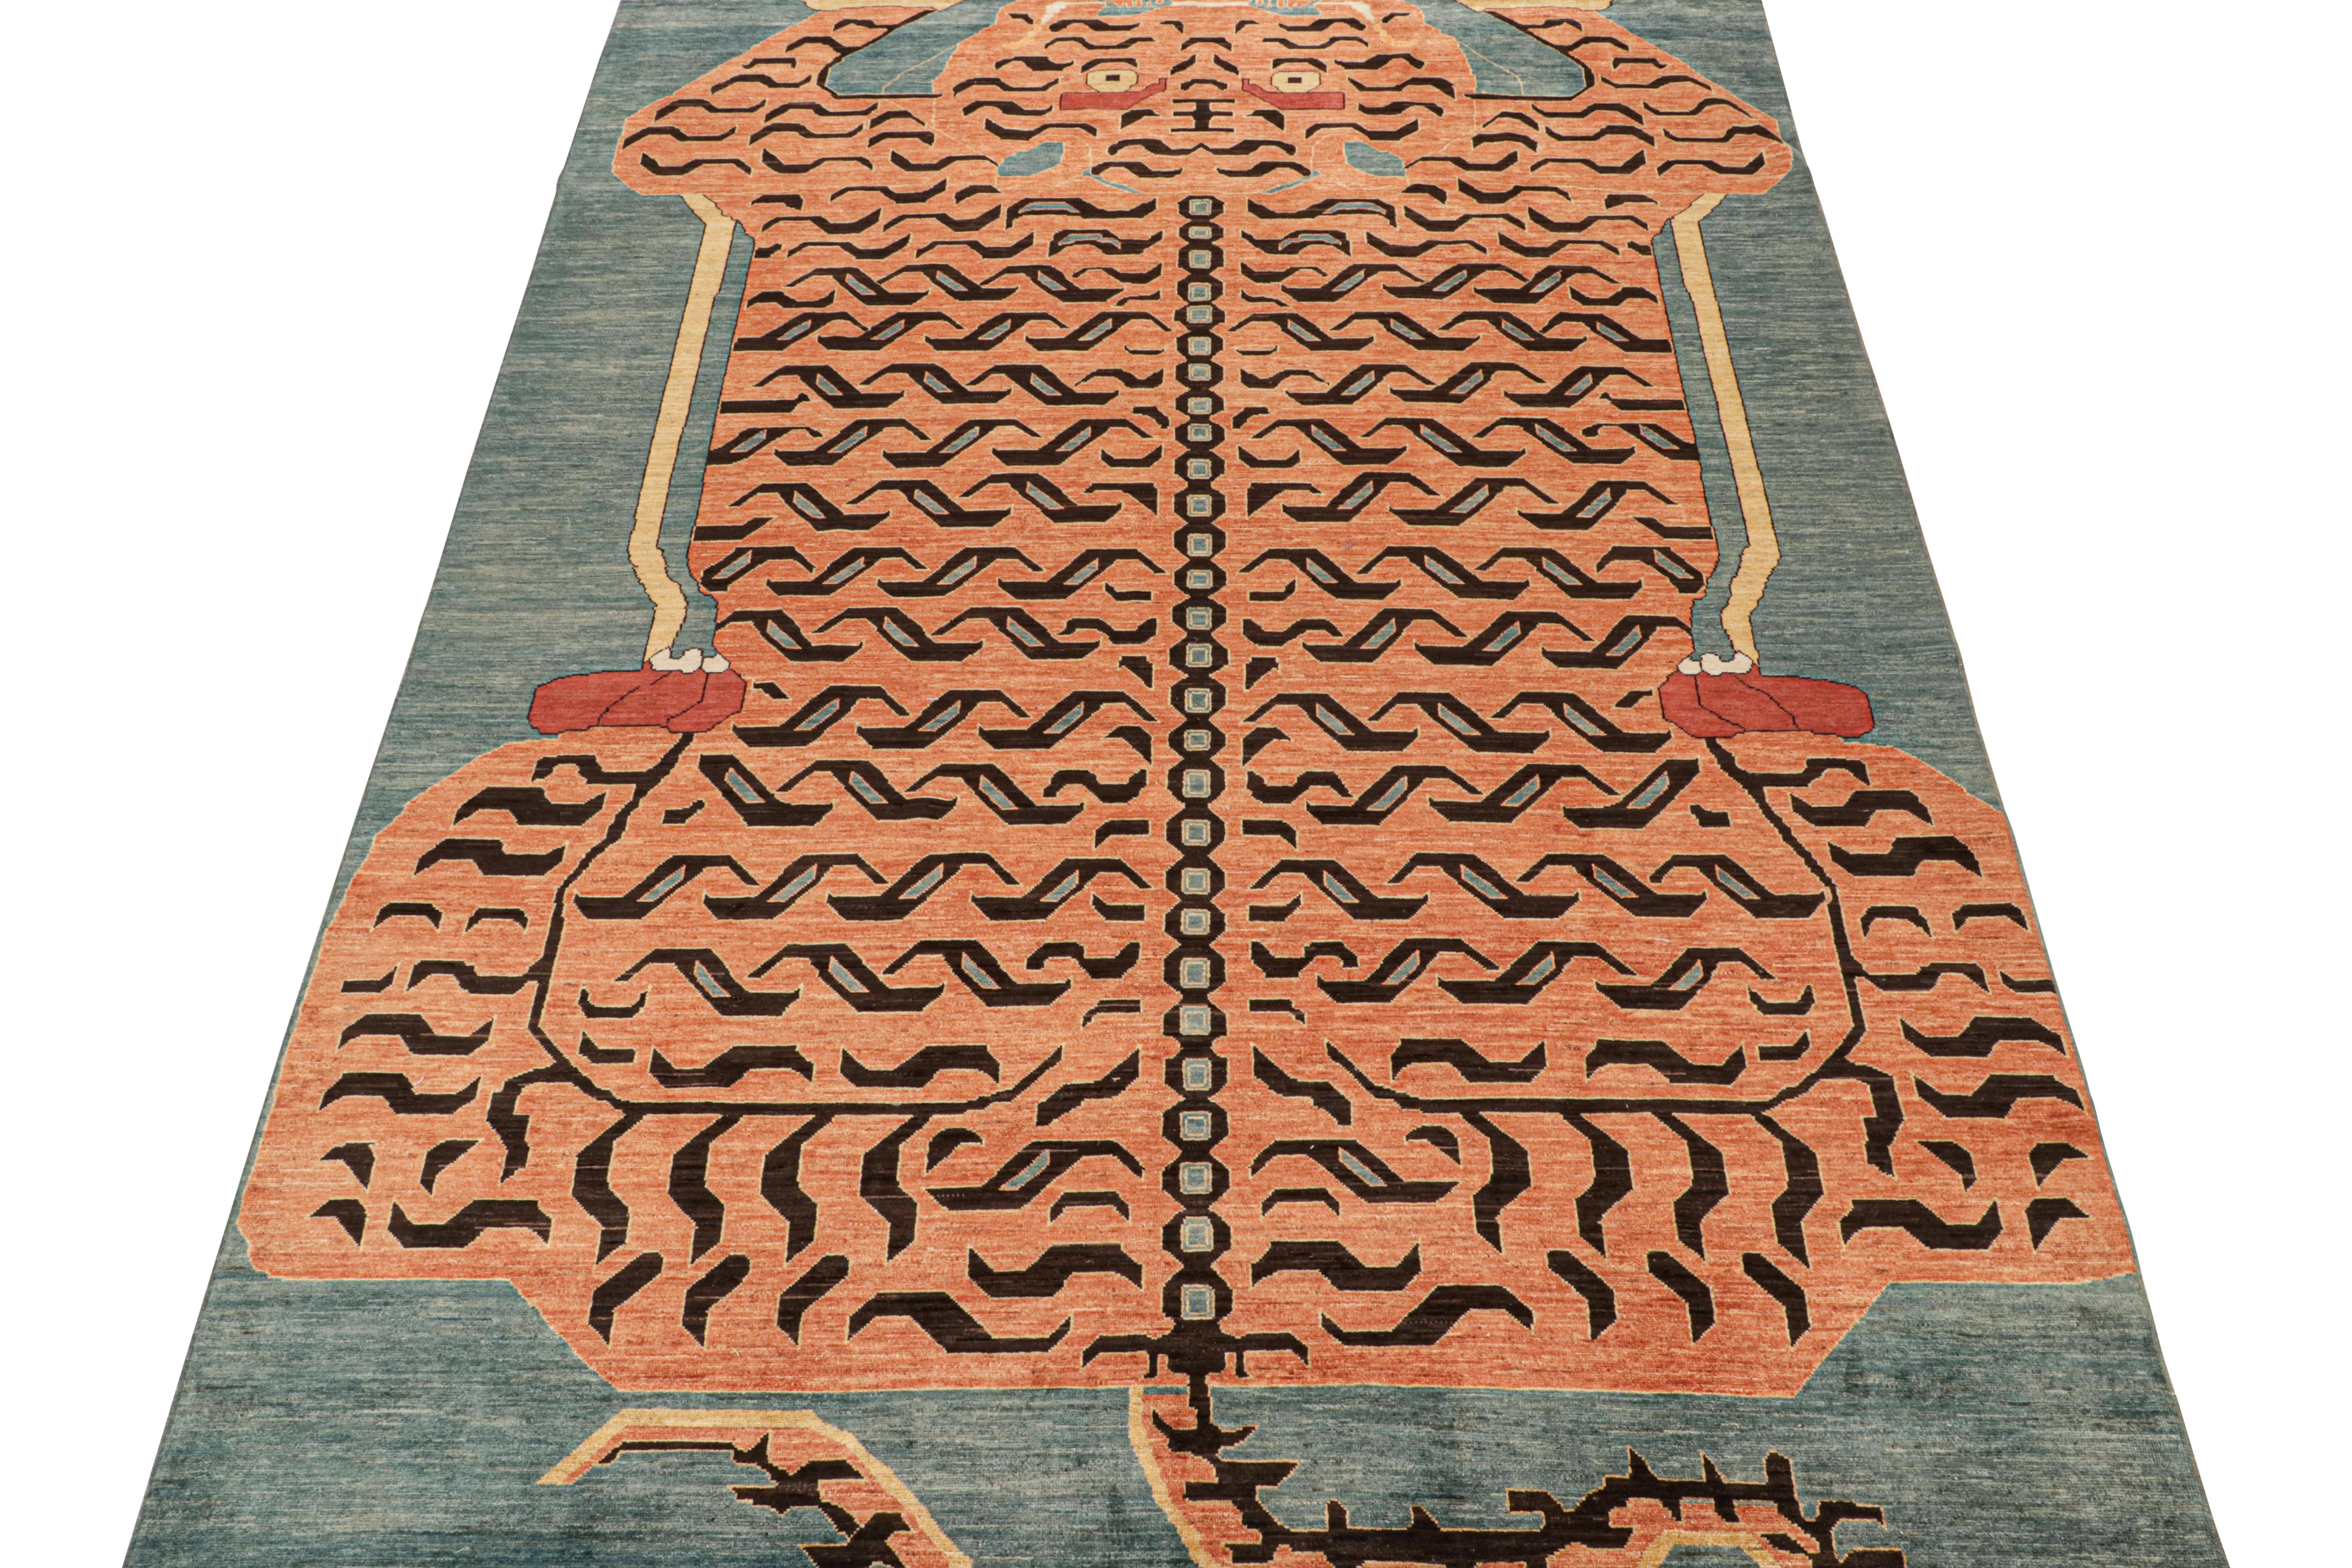 This custom rug design is a bold new addition to Rug & Kilim’s Tigers Collection. Our collection spans several cultures and recaptures iconic pictorial styles in folk art and handmade antique Oriental rugs alike. 

Further on the Design:

These